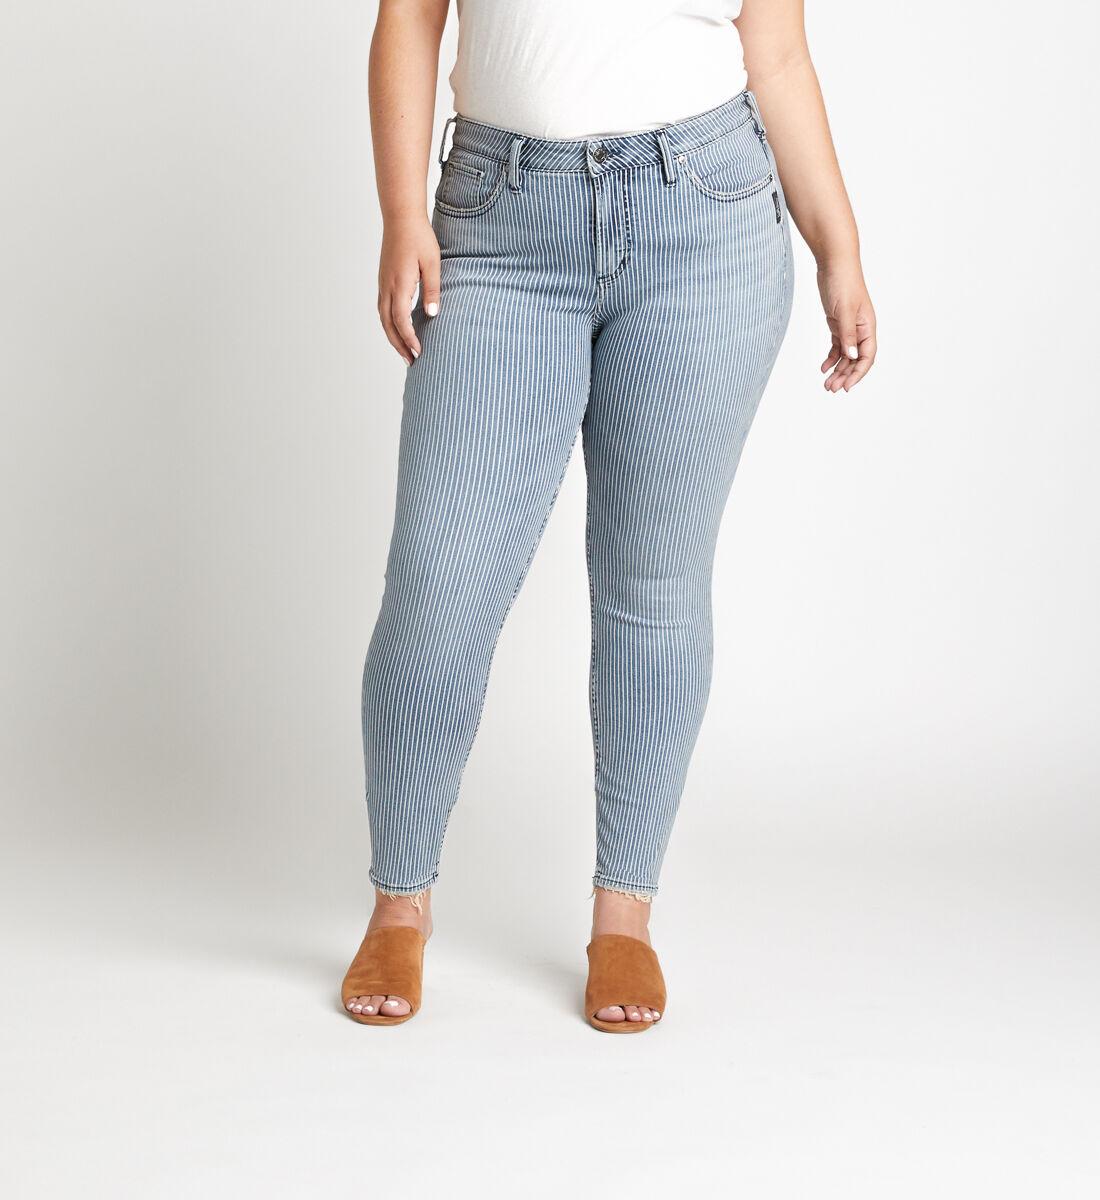 womens silver jeans outlet